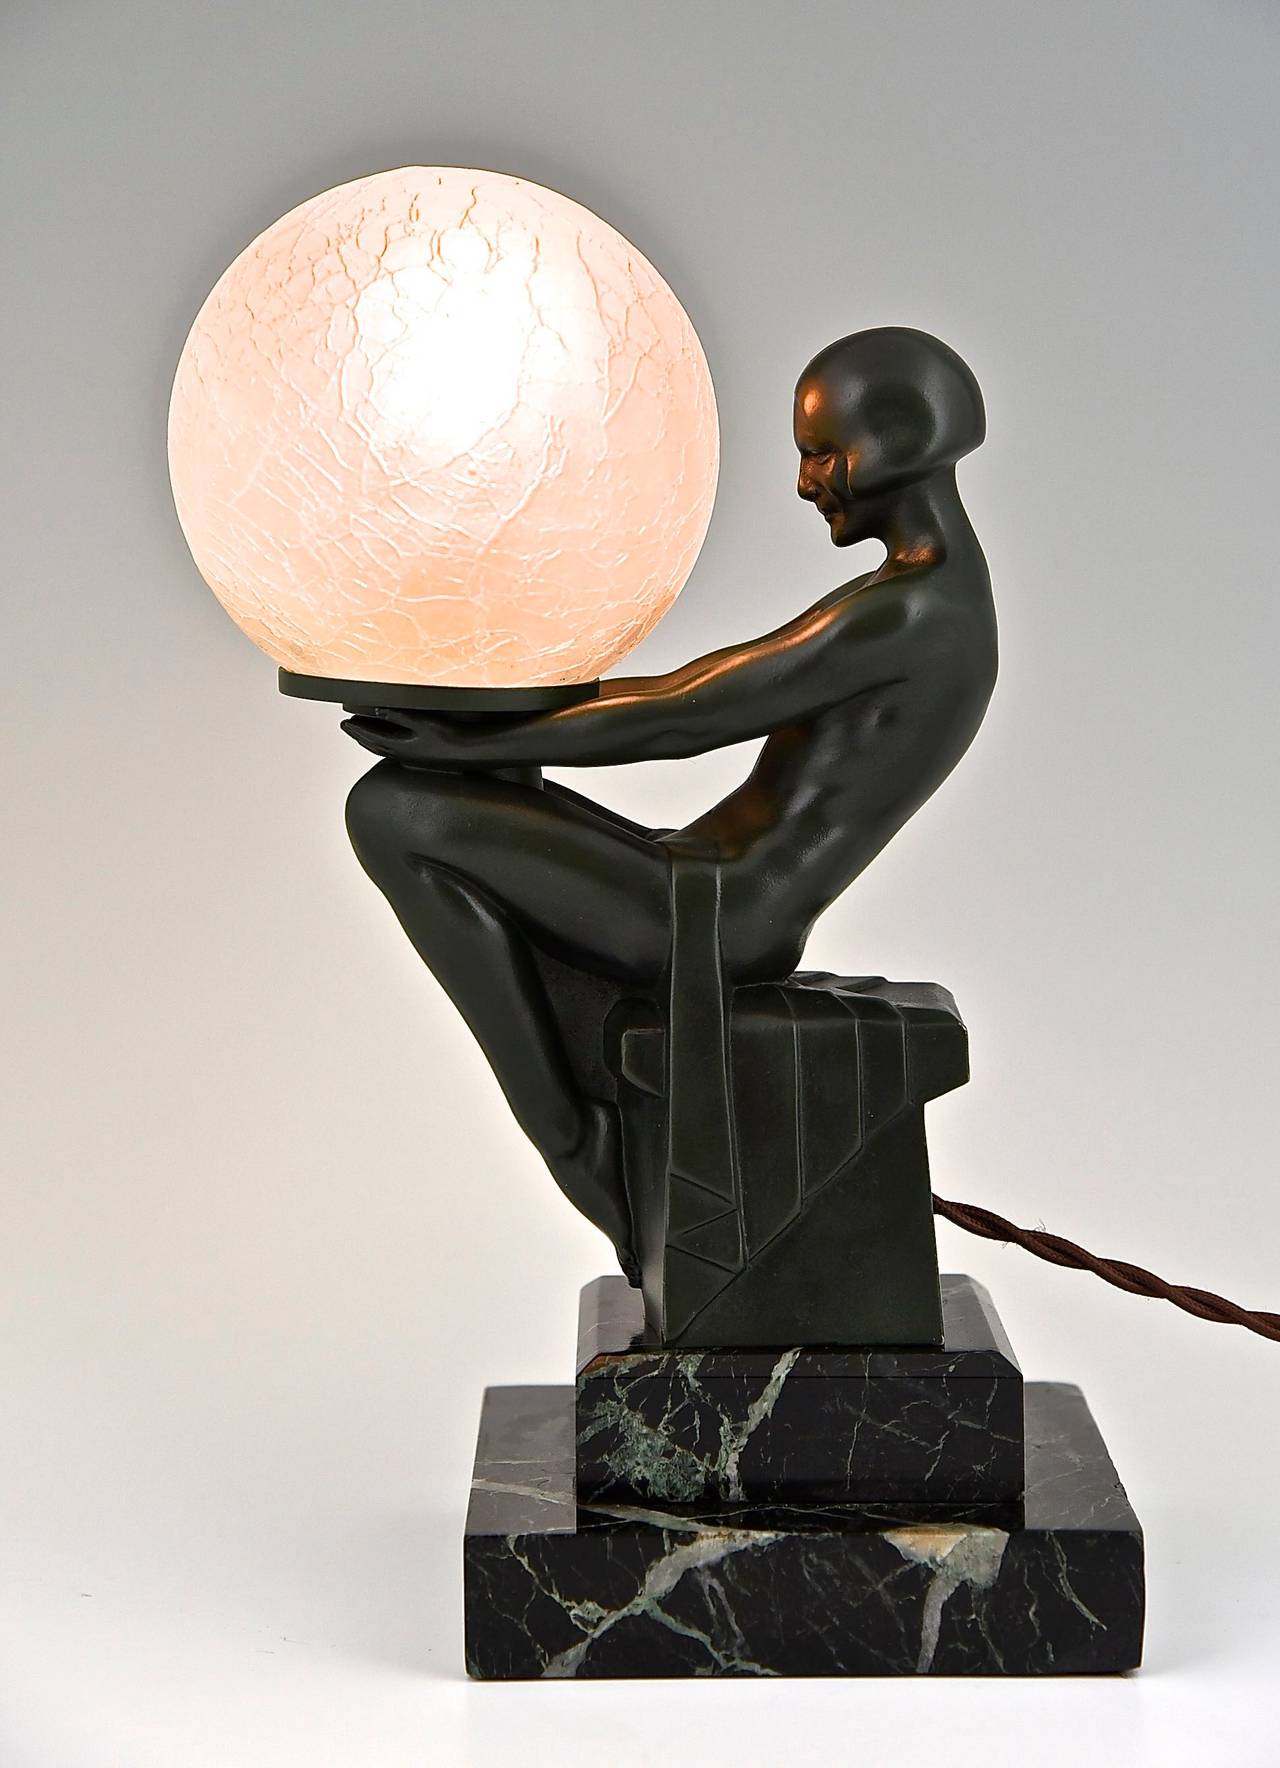 Art Deco figural table lamp of a sitting nude holding a glass shade.
Artist / Maker: Max Le Verrier. 
Signature / Marks: M. Le Verrier. 
Style:  Art Deco. 
Date: 1930.
Material: Dark green patinated metal.  Marble base.  Crackled glass shade.